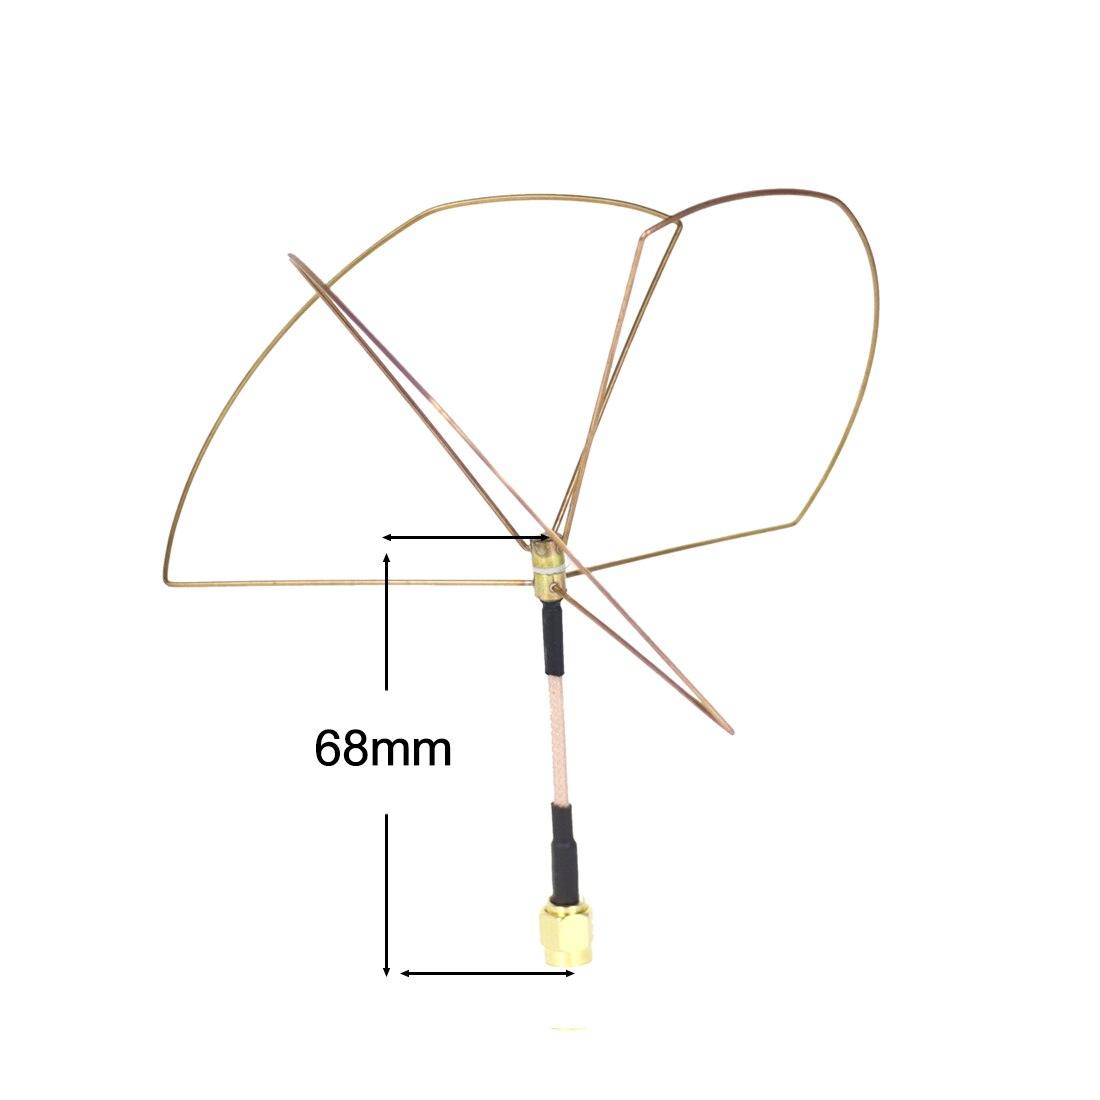 ShenStar 1.2GHz Clover Leaf Antenna 3 /4 Leaves Circular Polarized SMA male for FPV Racing Drone 1.2G Video Transmitter Receiver - RCDrone